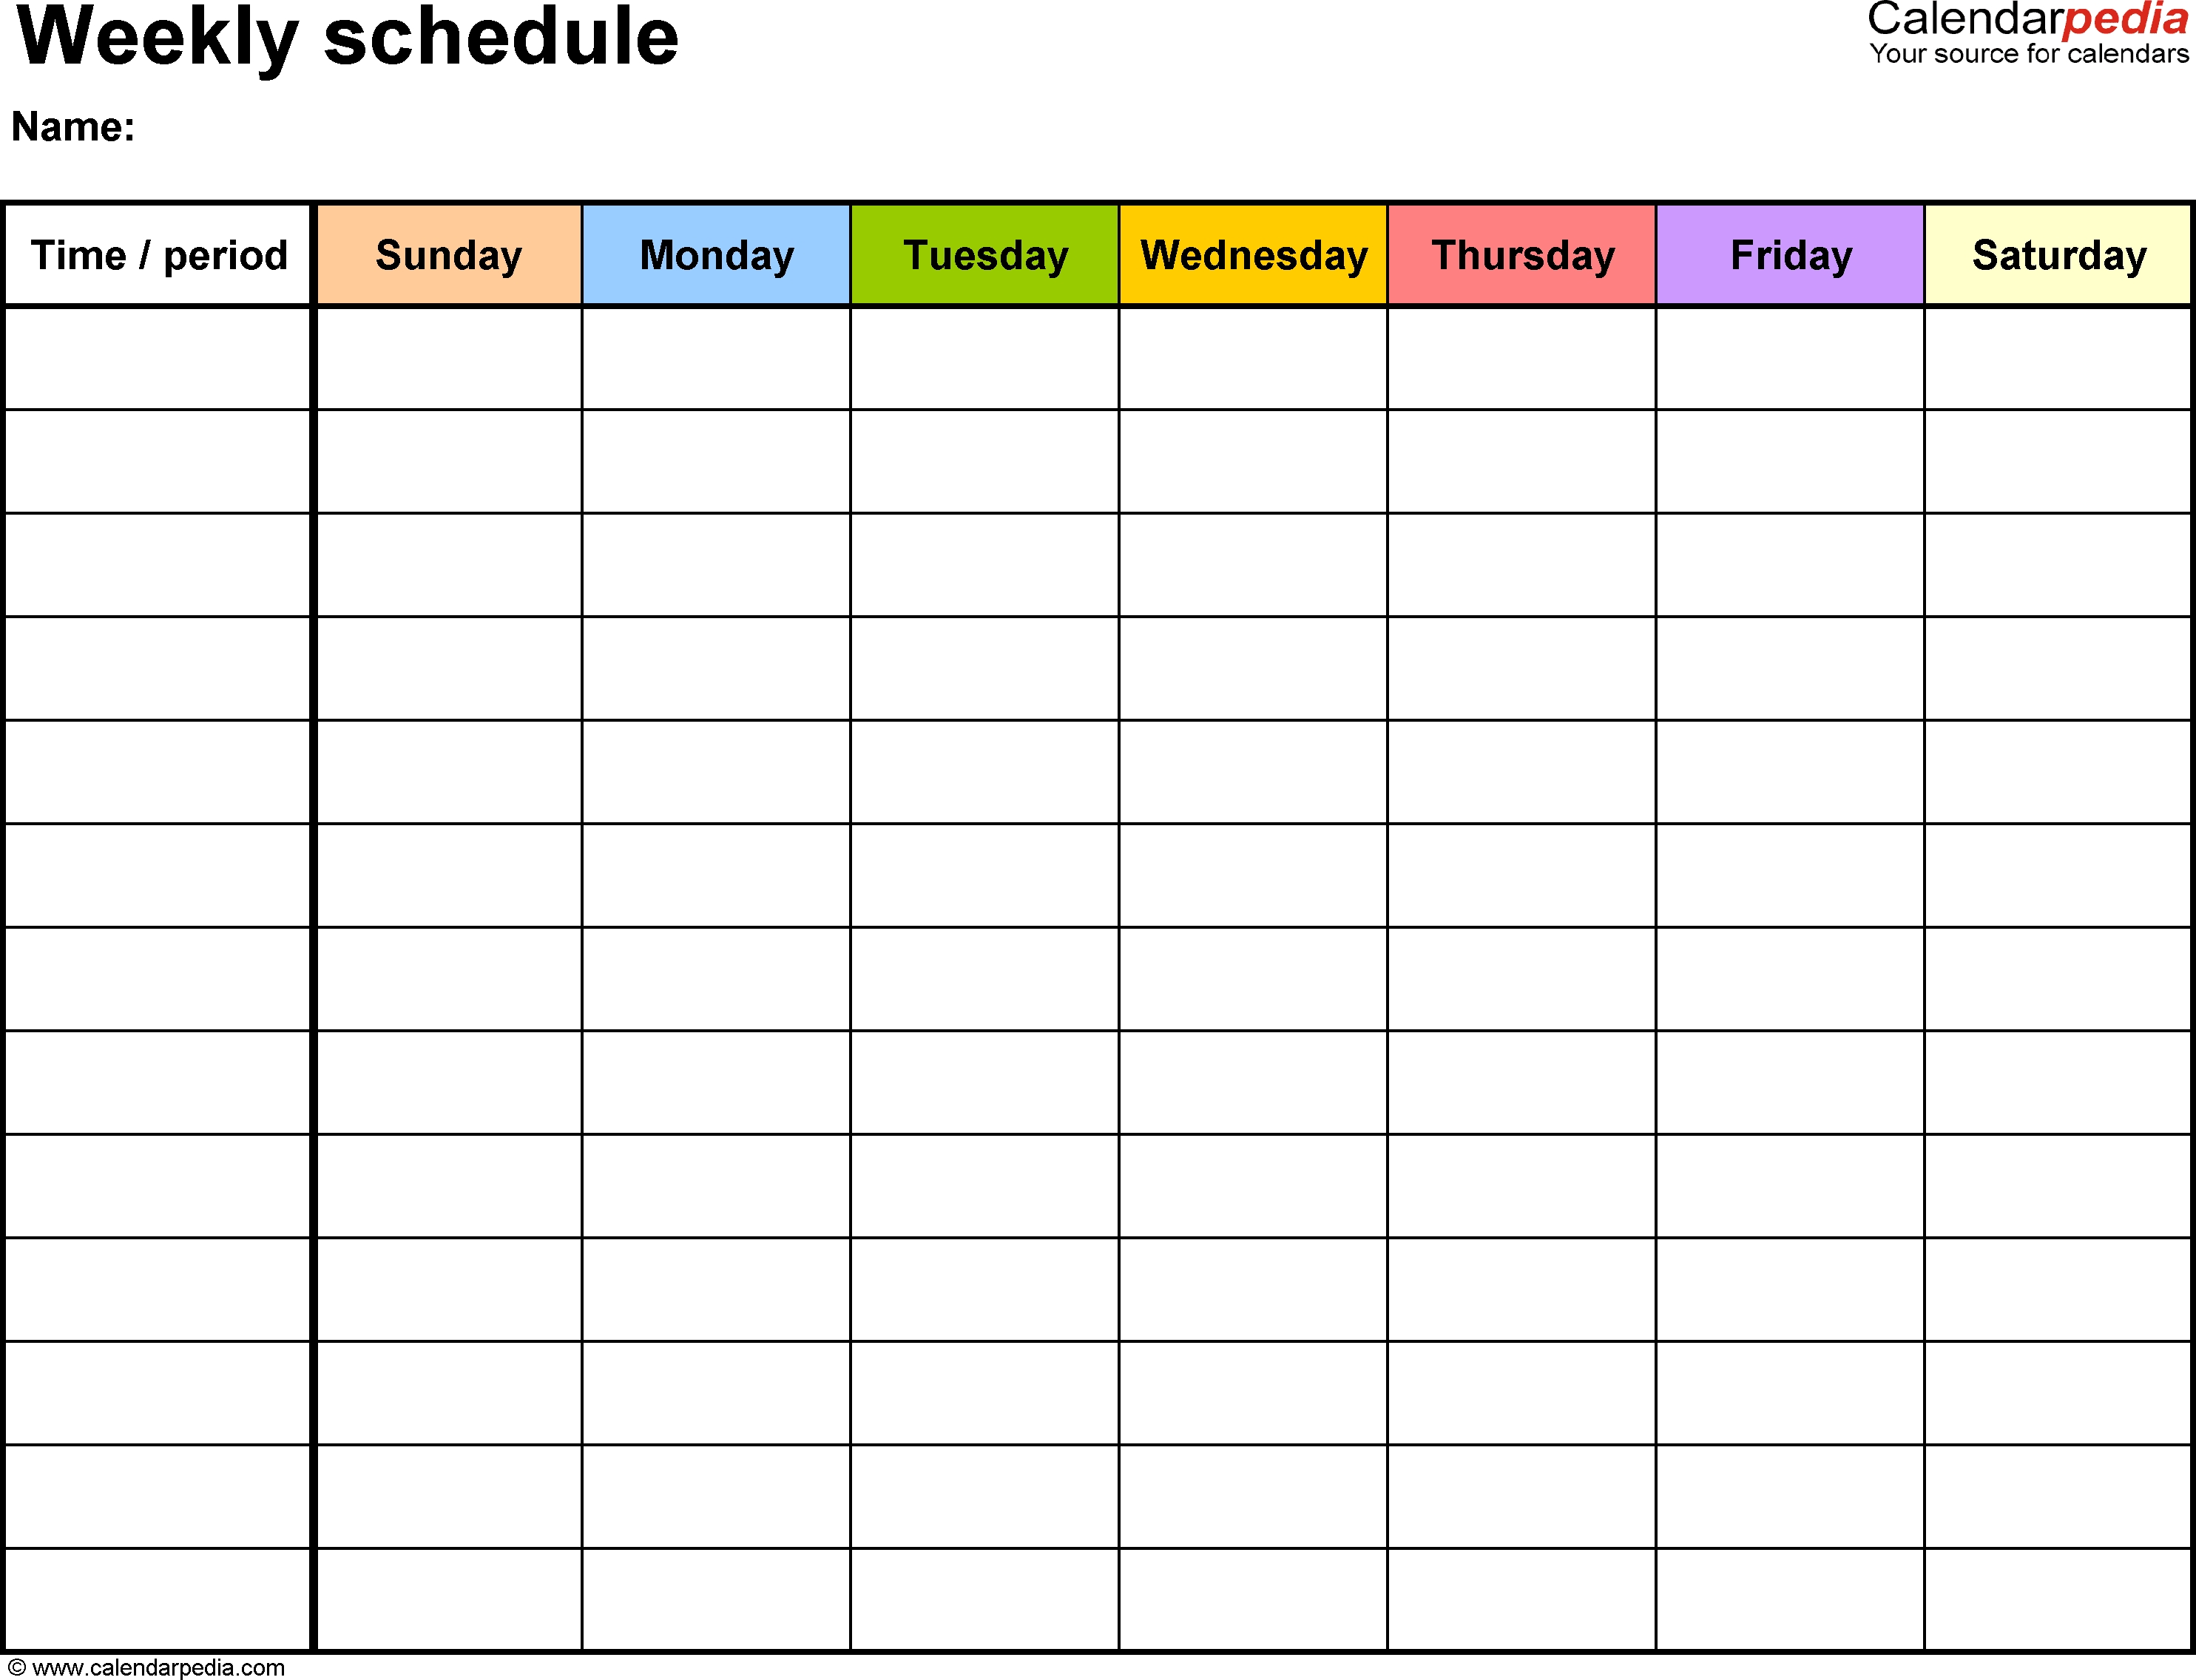 Free Weekly Schedule Templates For Excel - 18 Templates | ~Yoga in Printable Blank Weekly Calendar With Times